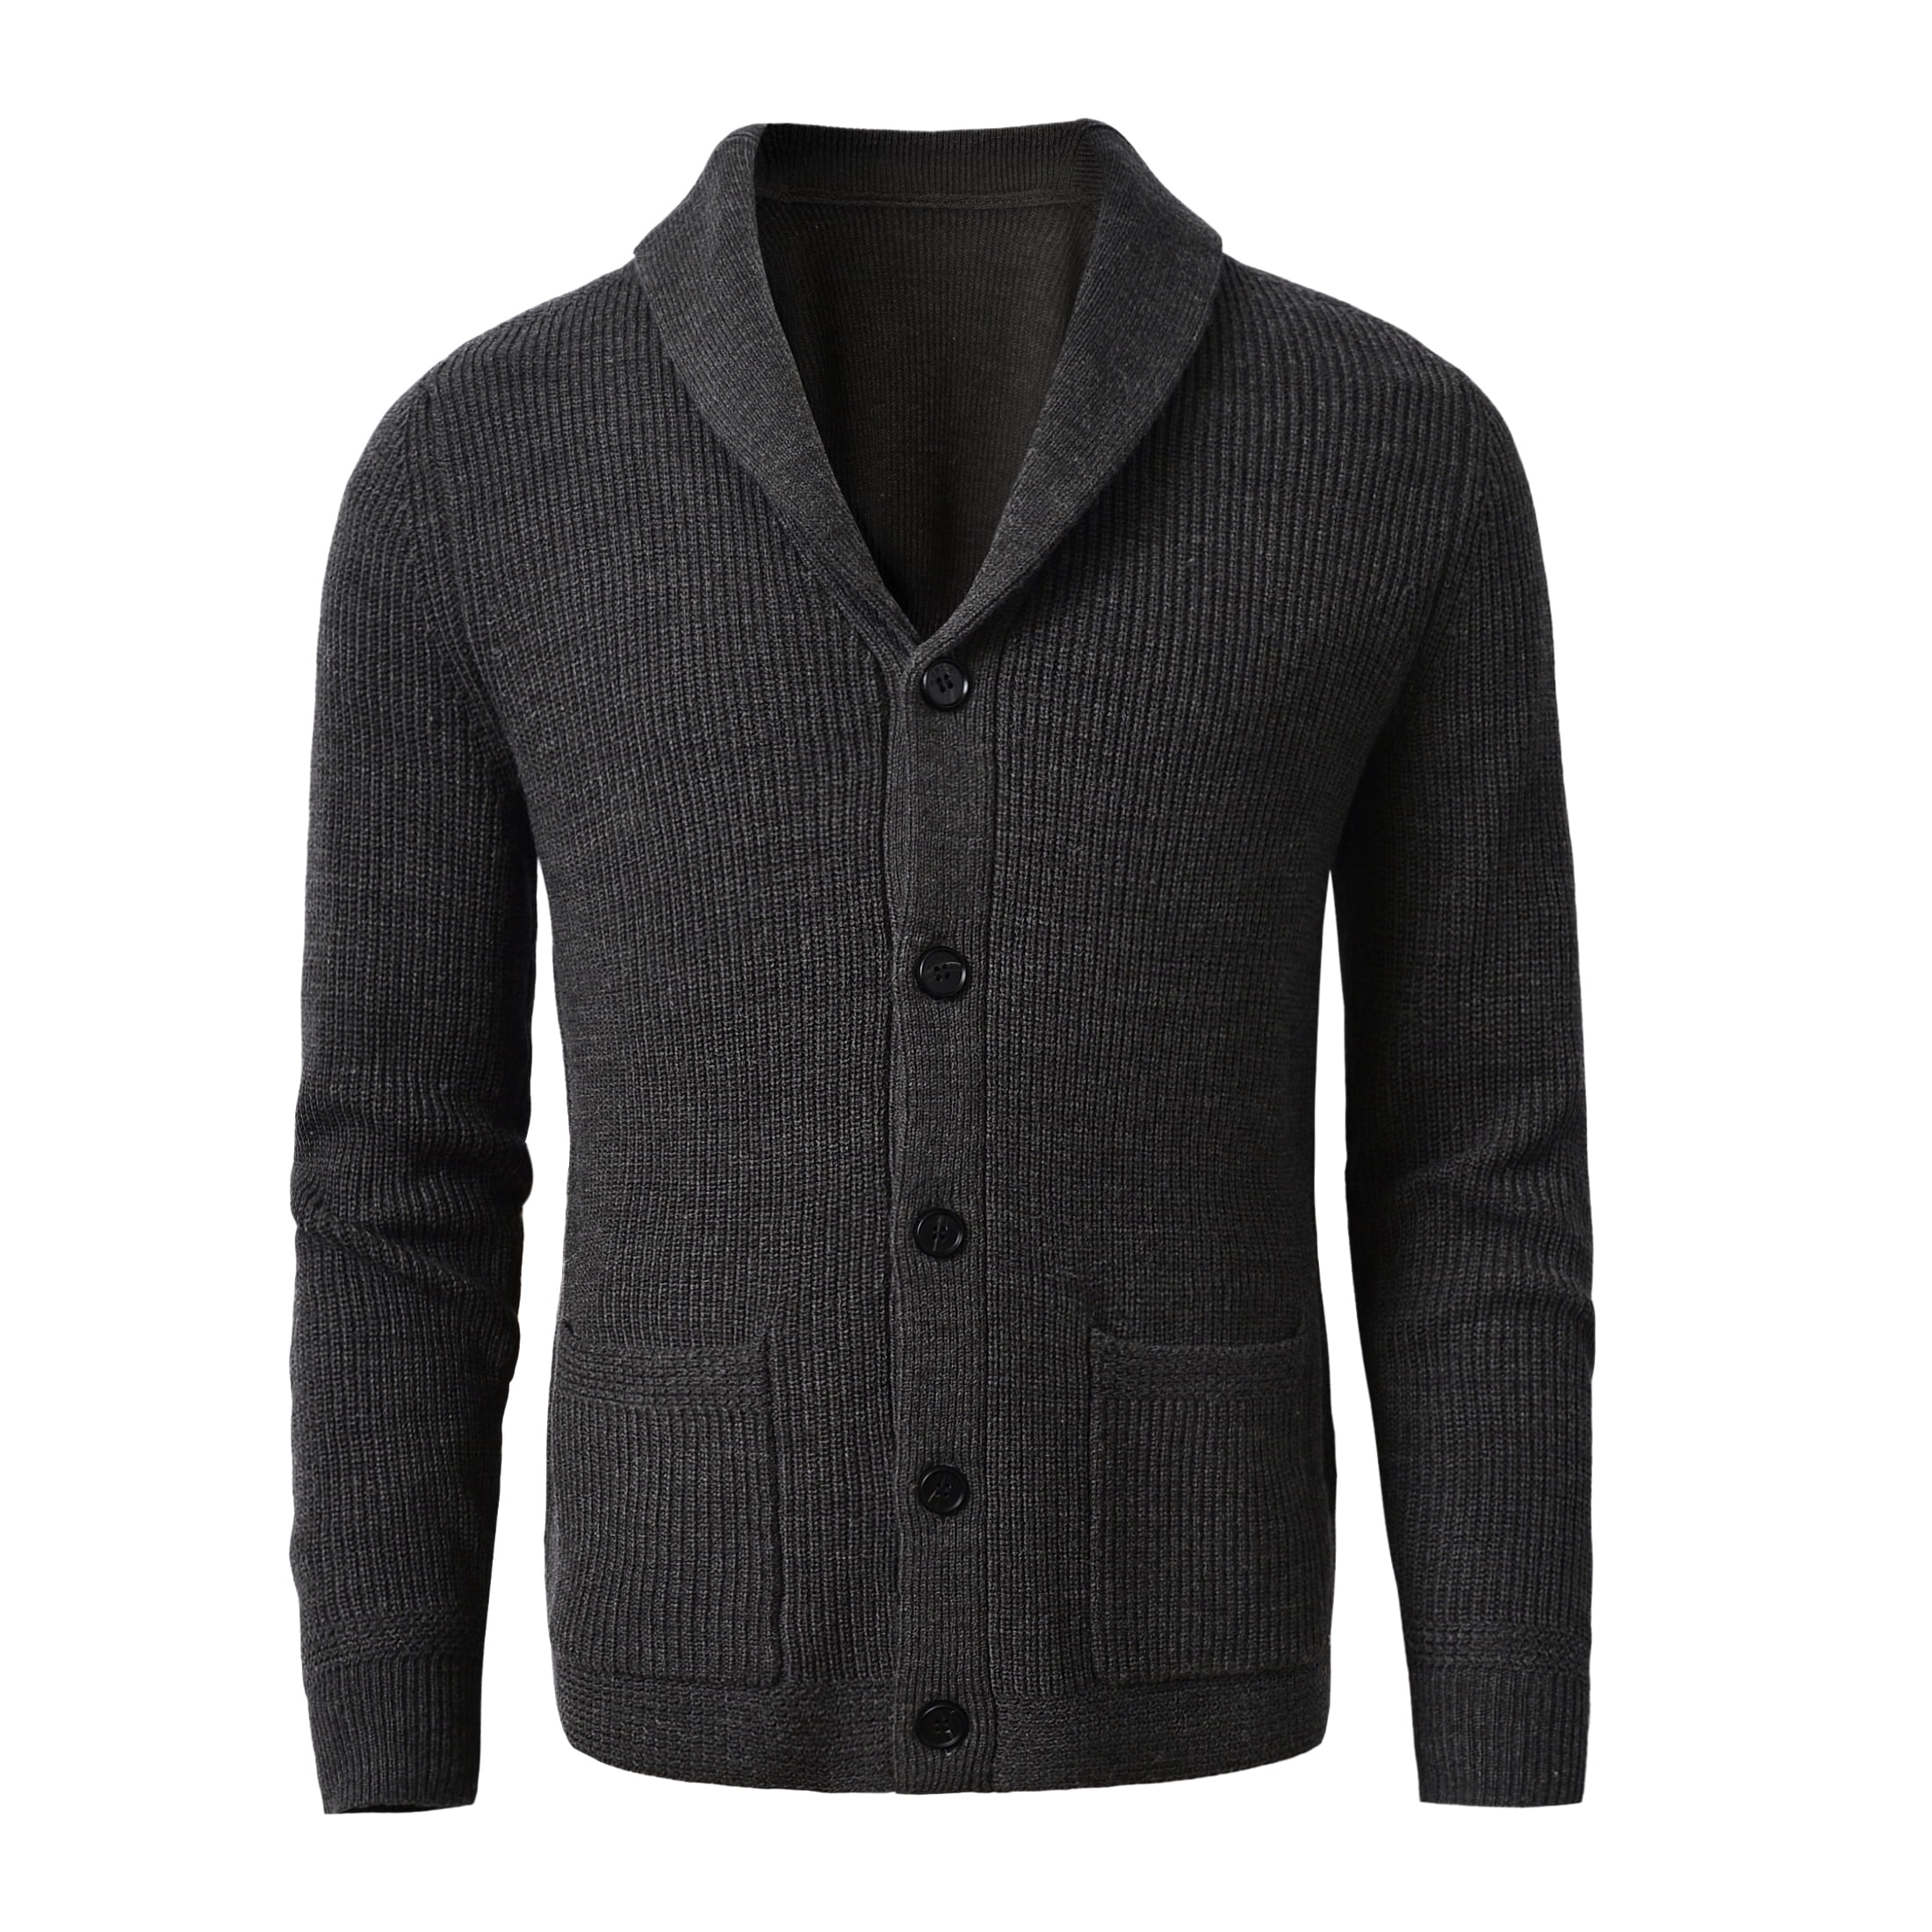 Plus Size Casual Solid Knitted Sweater Jackets Men Zipper Black Korean  Sweaters Hooded Pockets Cardigan Hombre Cremallera Winter 201105 From  Bai02, $35.78